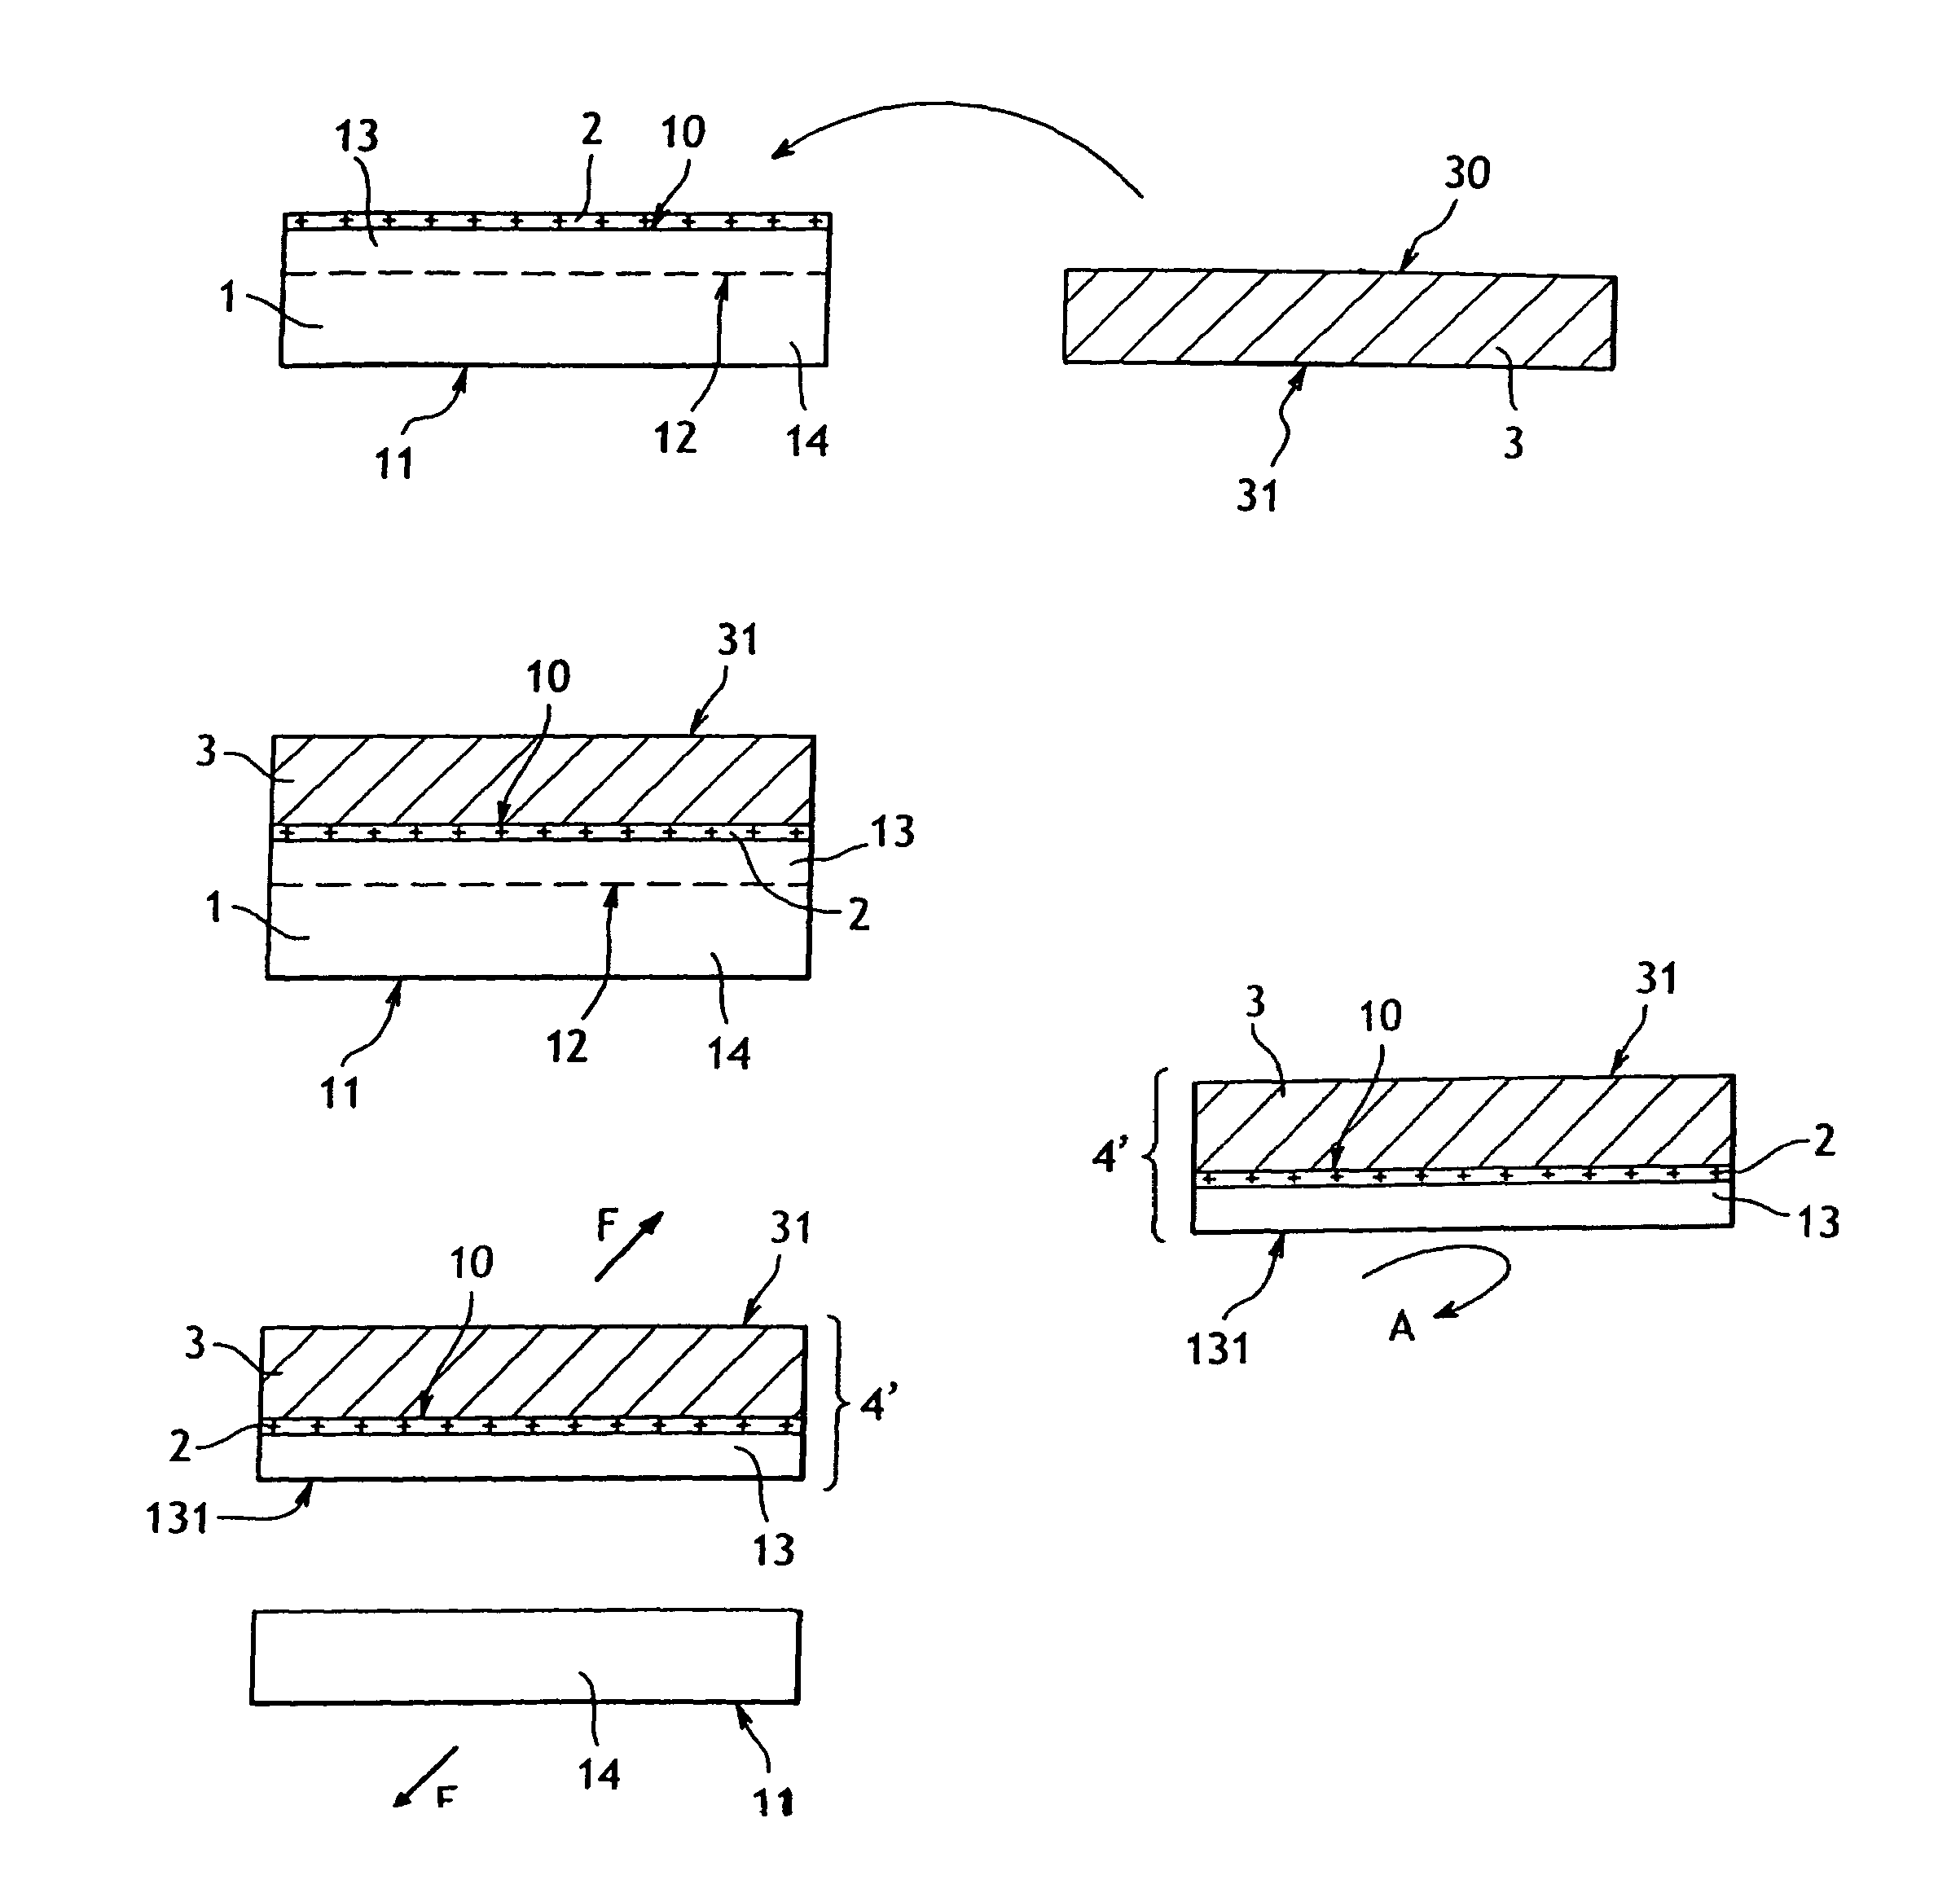 Method of producing a semiconductor structure having at least one support substrate and an ultrathin layer